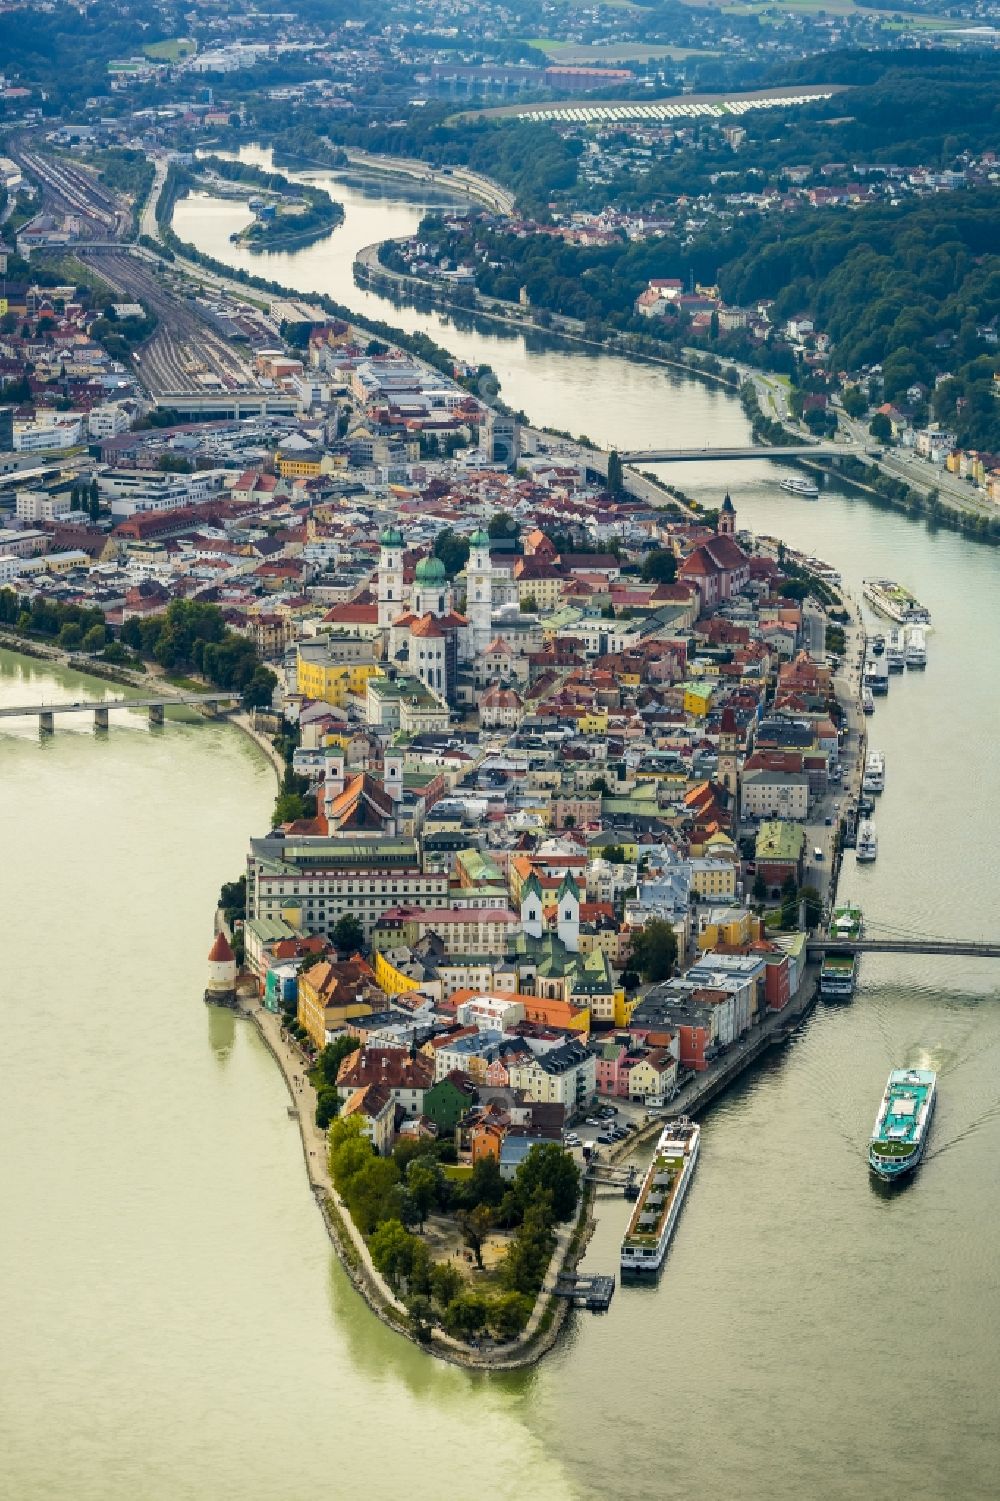 Aerial photograph Passau - The university town of Passau in the state of Bavaria. Because of the junction of the rivers Ilz, Inn and Danube, Passau is also called Three Rivers Town. Visible here is the pointed peninsula, which is surrounded by the Inn to the South and the Danube to the North. It is the site of the cathedral St. Stephan. The river Ilz joins the other two by running through the Untersolden part of the town